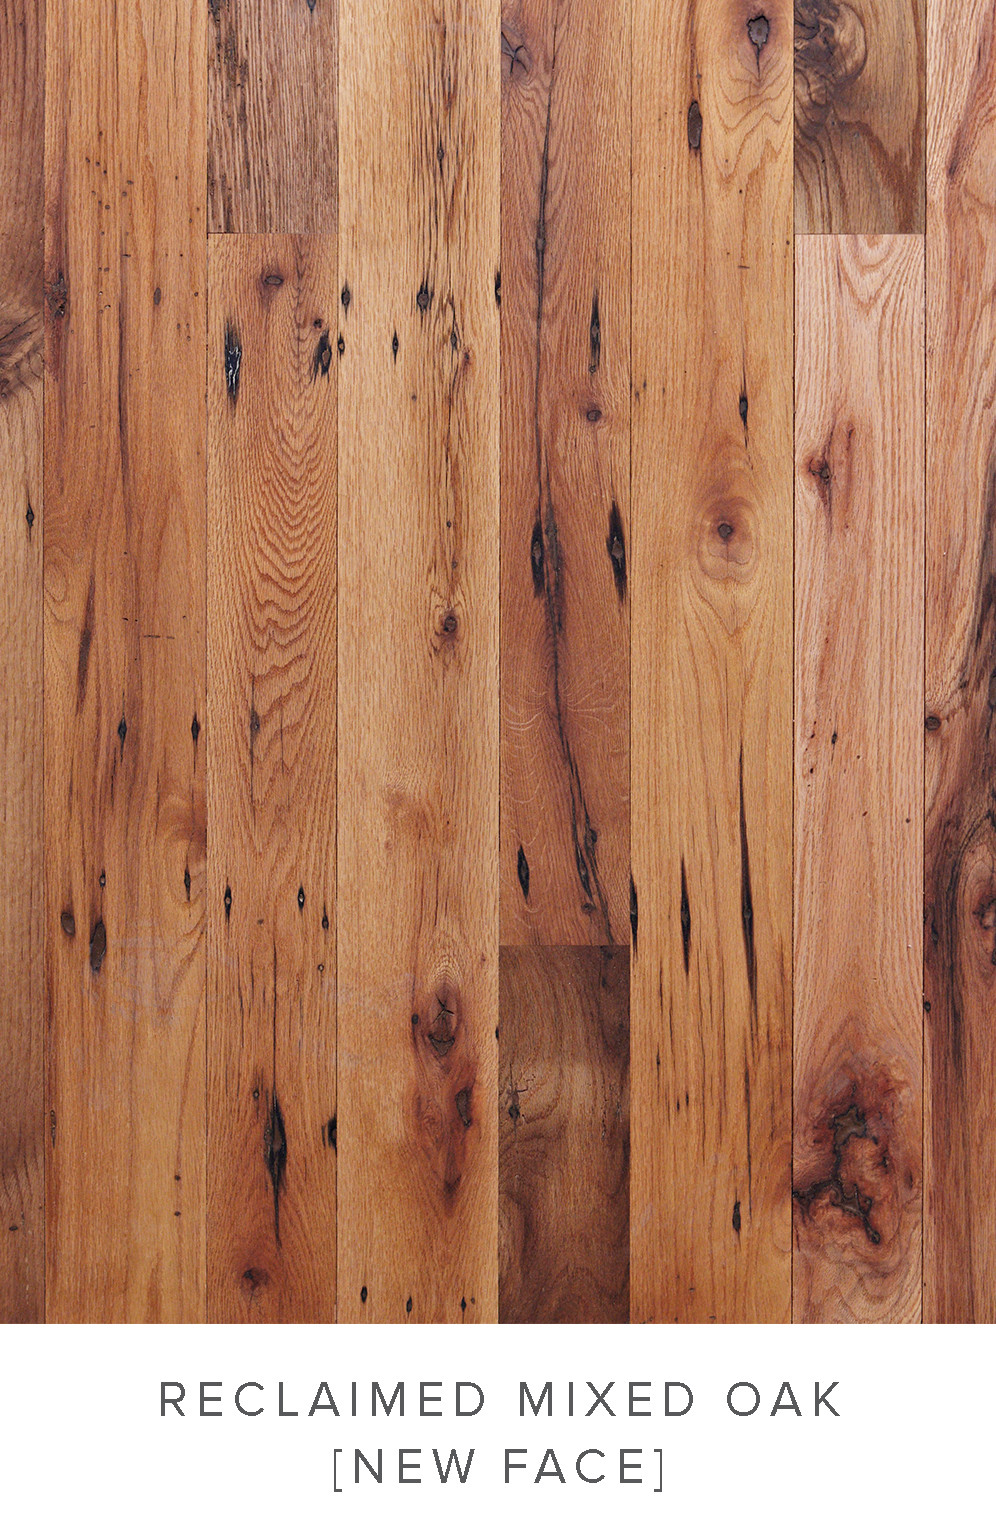 28 Unique Hardwood Flooring Suppliers In New Jersey 2024 free download hardwood flooring suppliers in new jersey of reclaimed old regarding reclaimed mixed oak new face